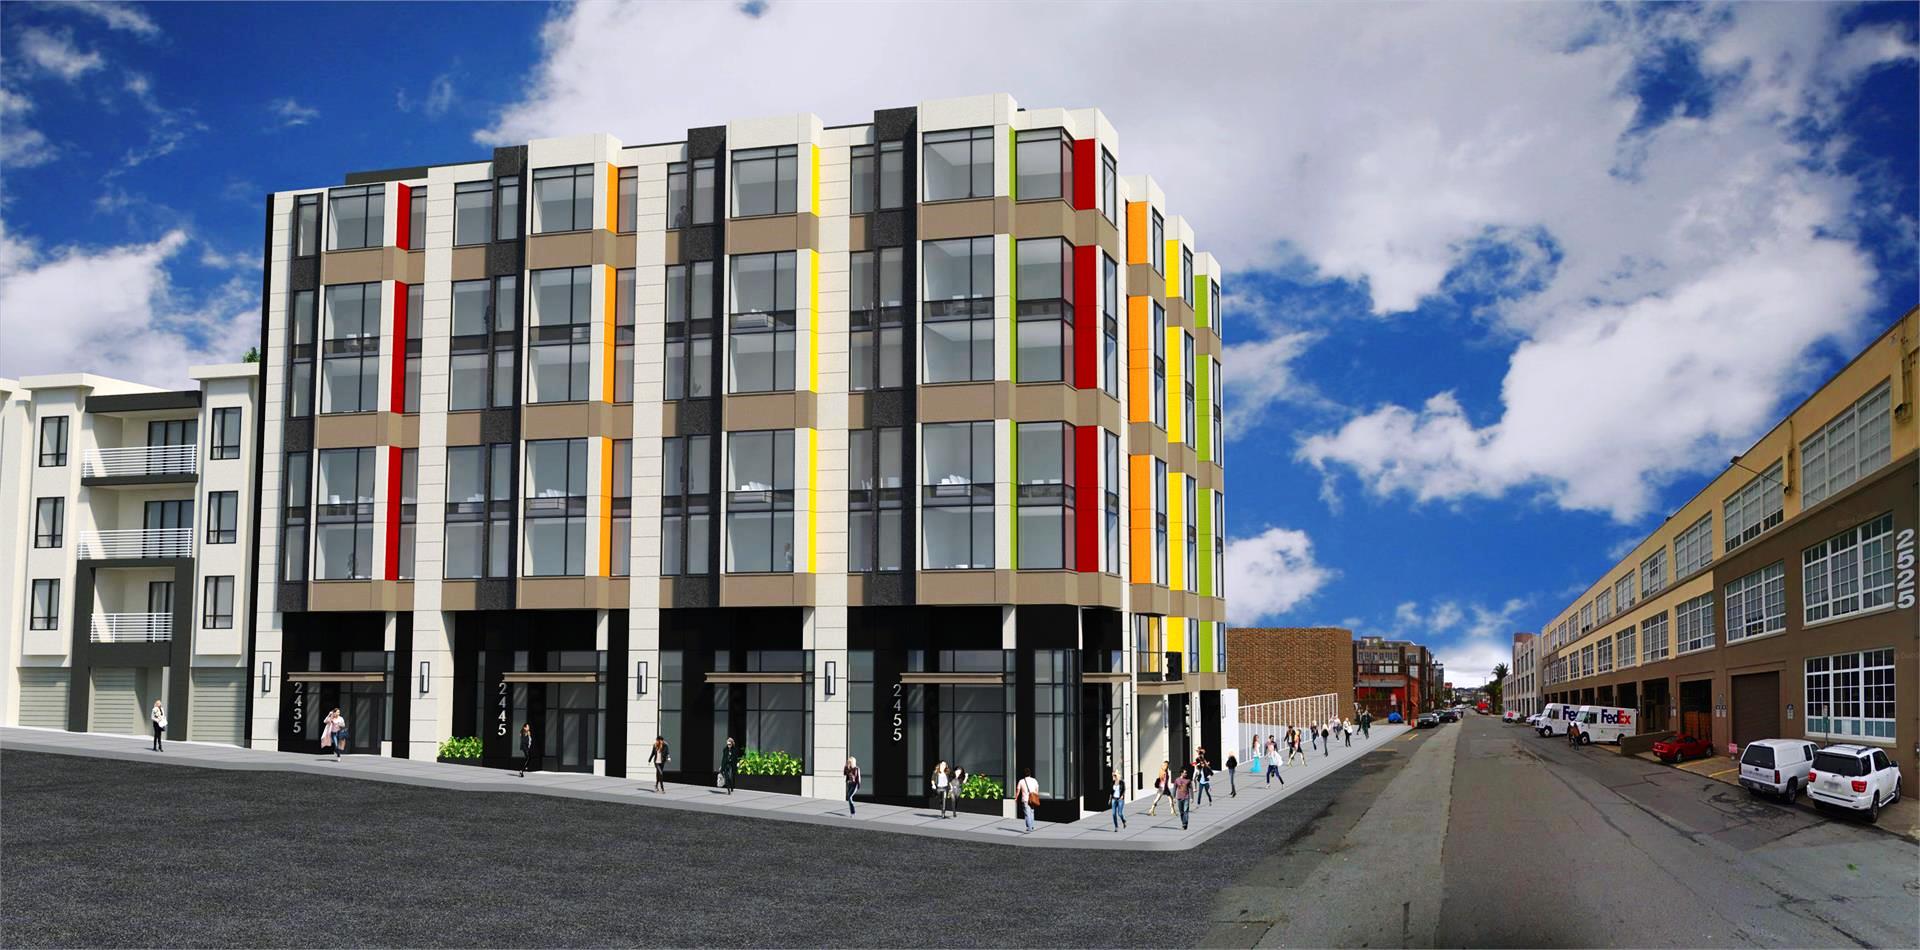 Rendering of the striped building proposed for 16th Street